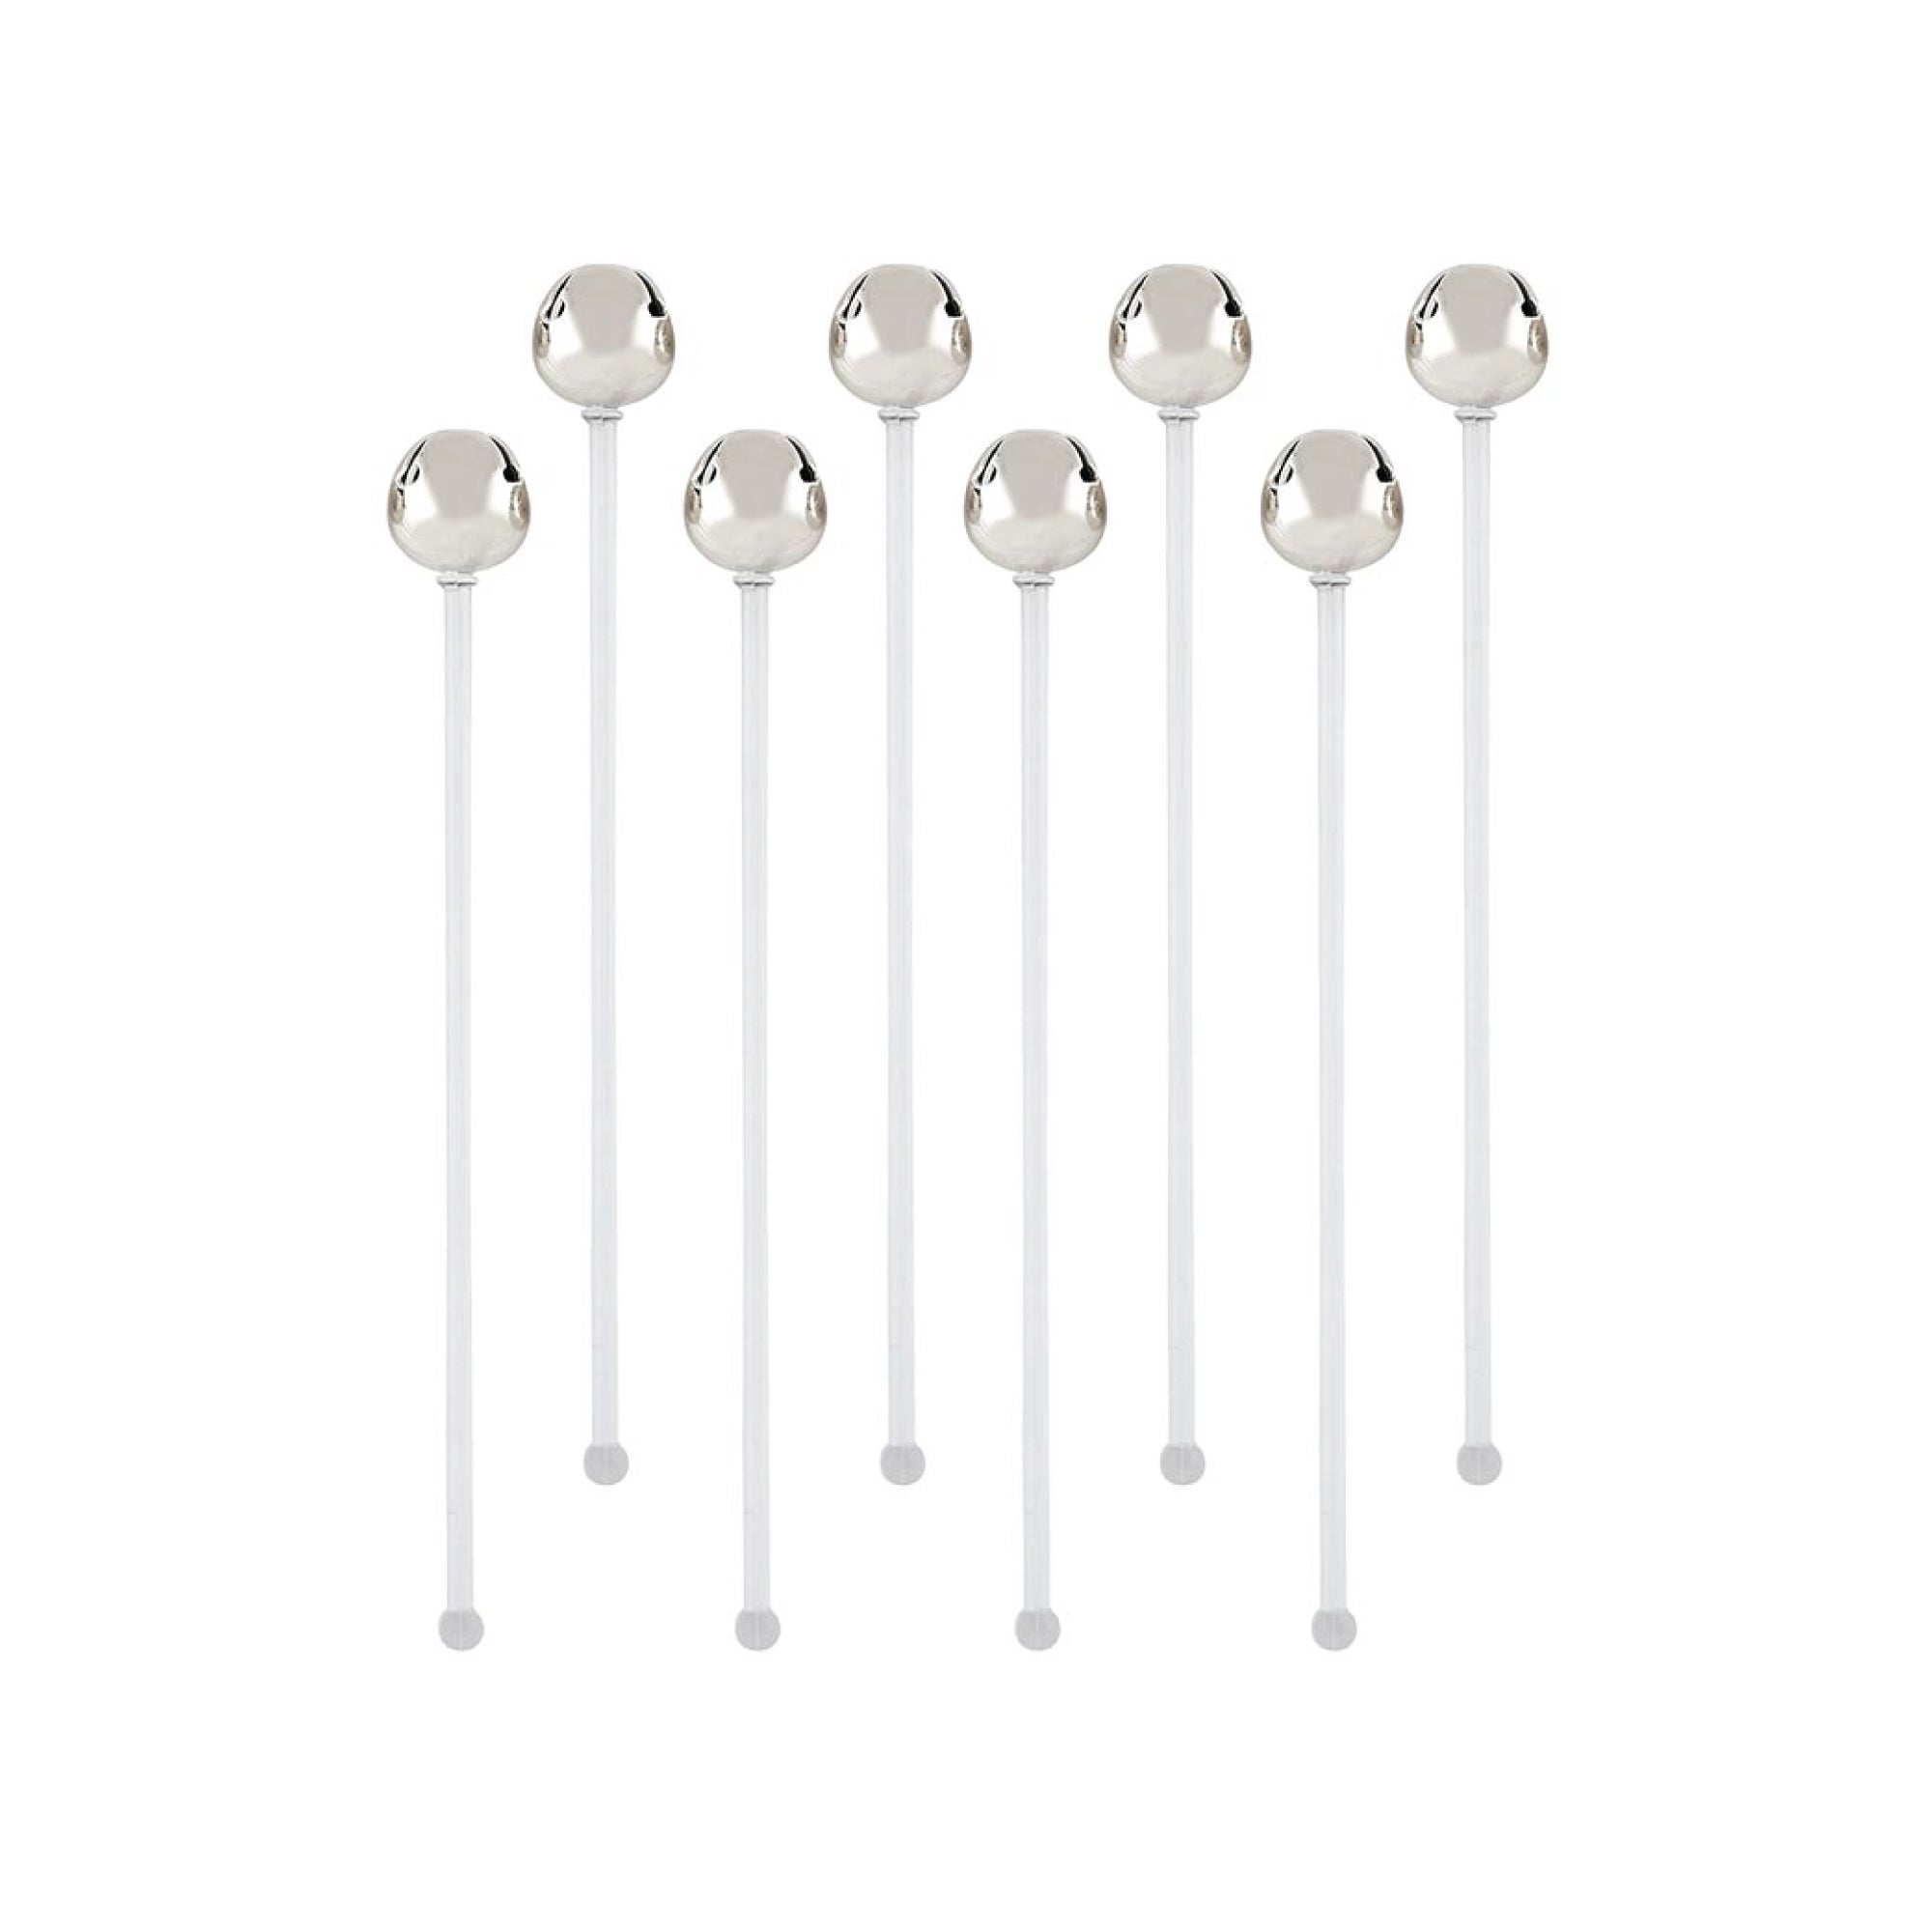 Silver Jingle Bell Drink Stirrers 8ct | The Party Darling